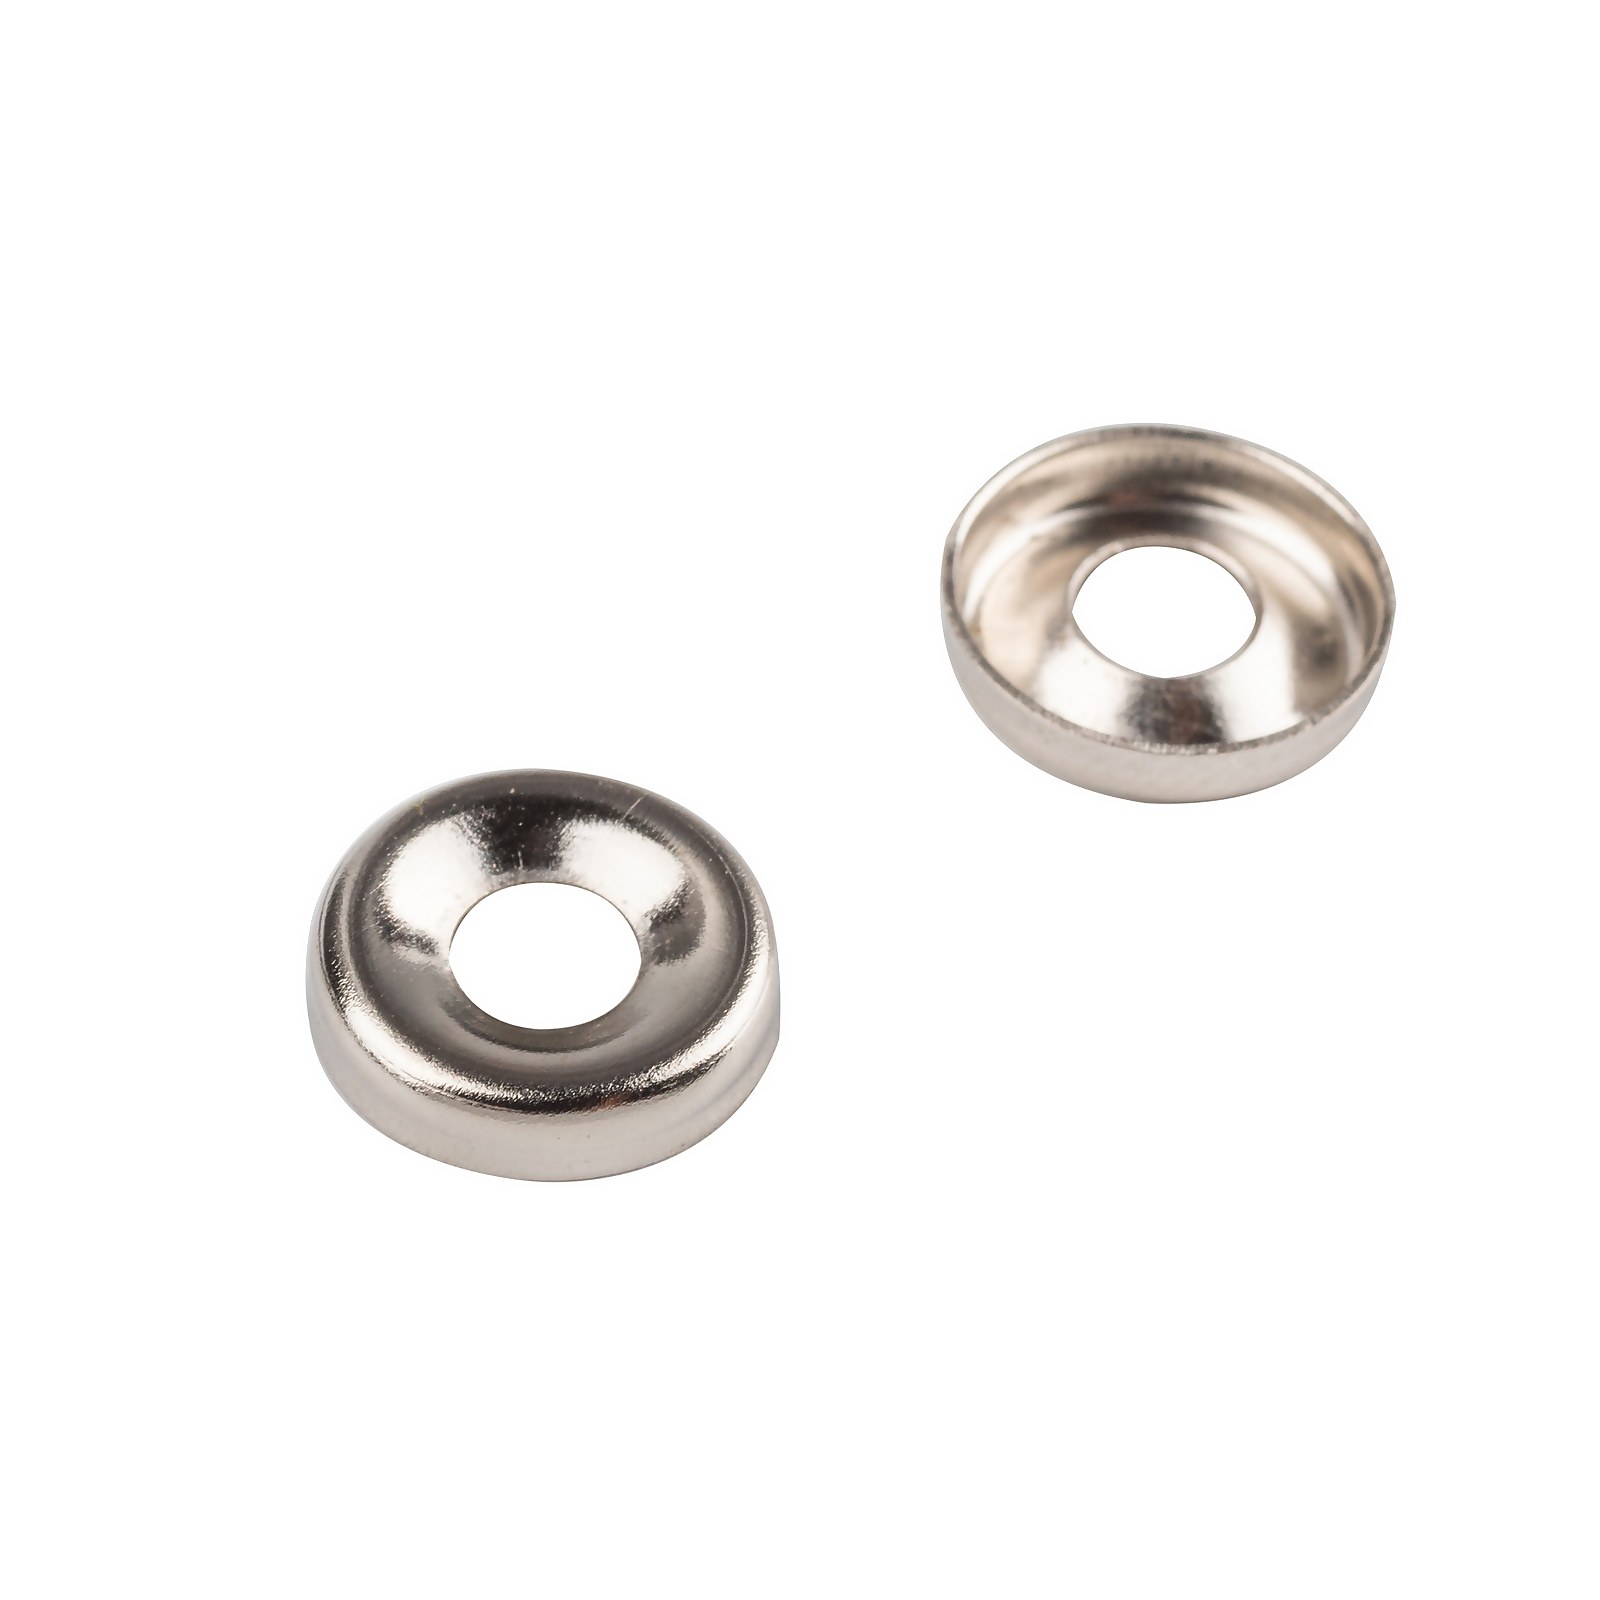 Photo of Homebase Nickel Plated Screw Cup Washer 4mm X 20 Pack